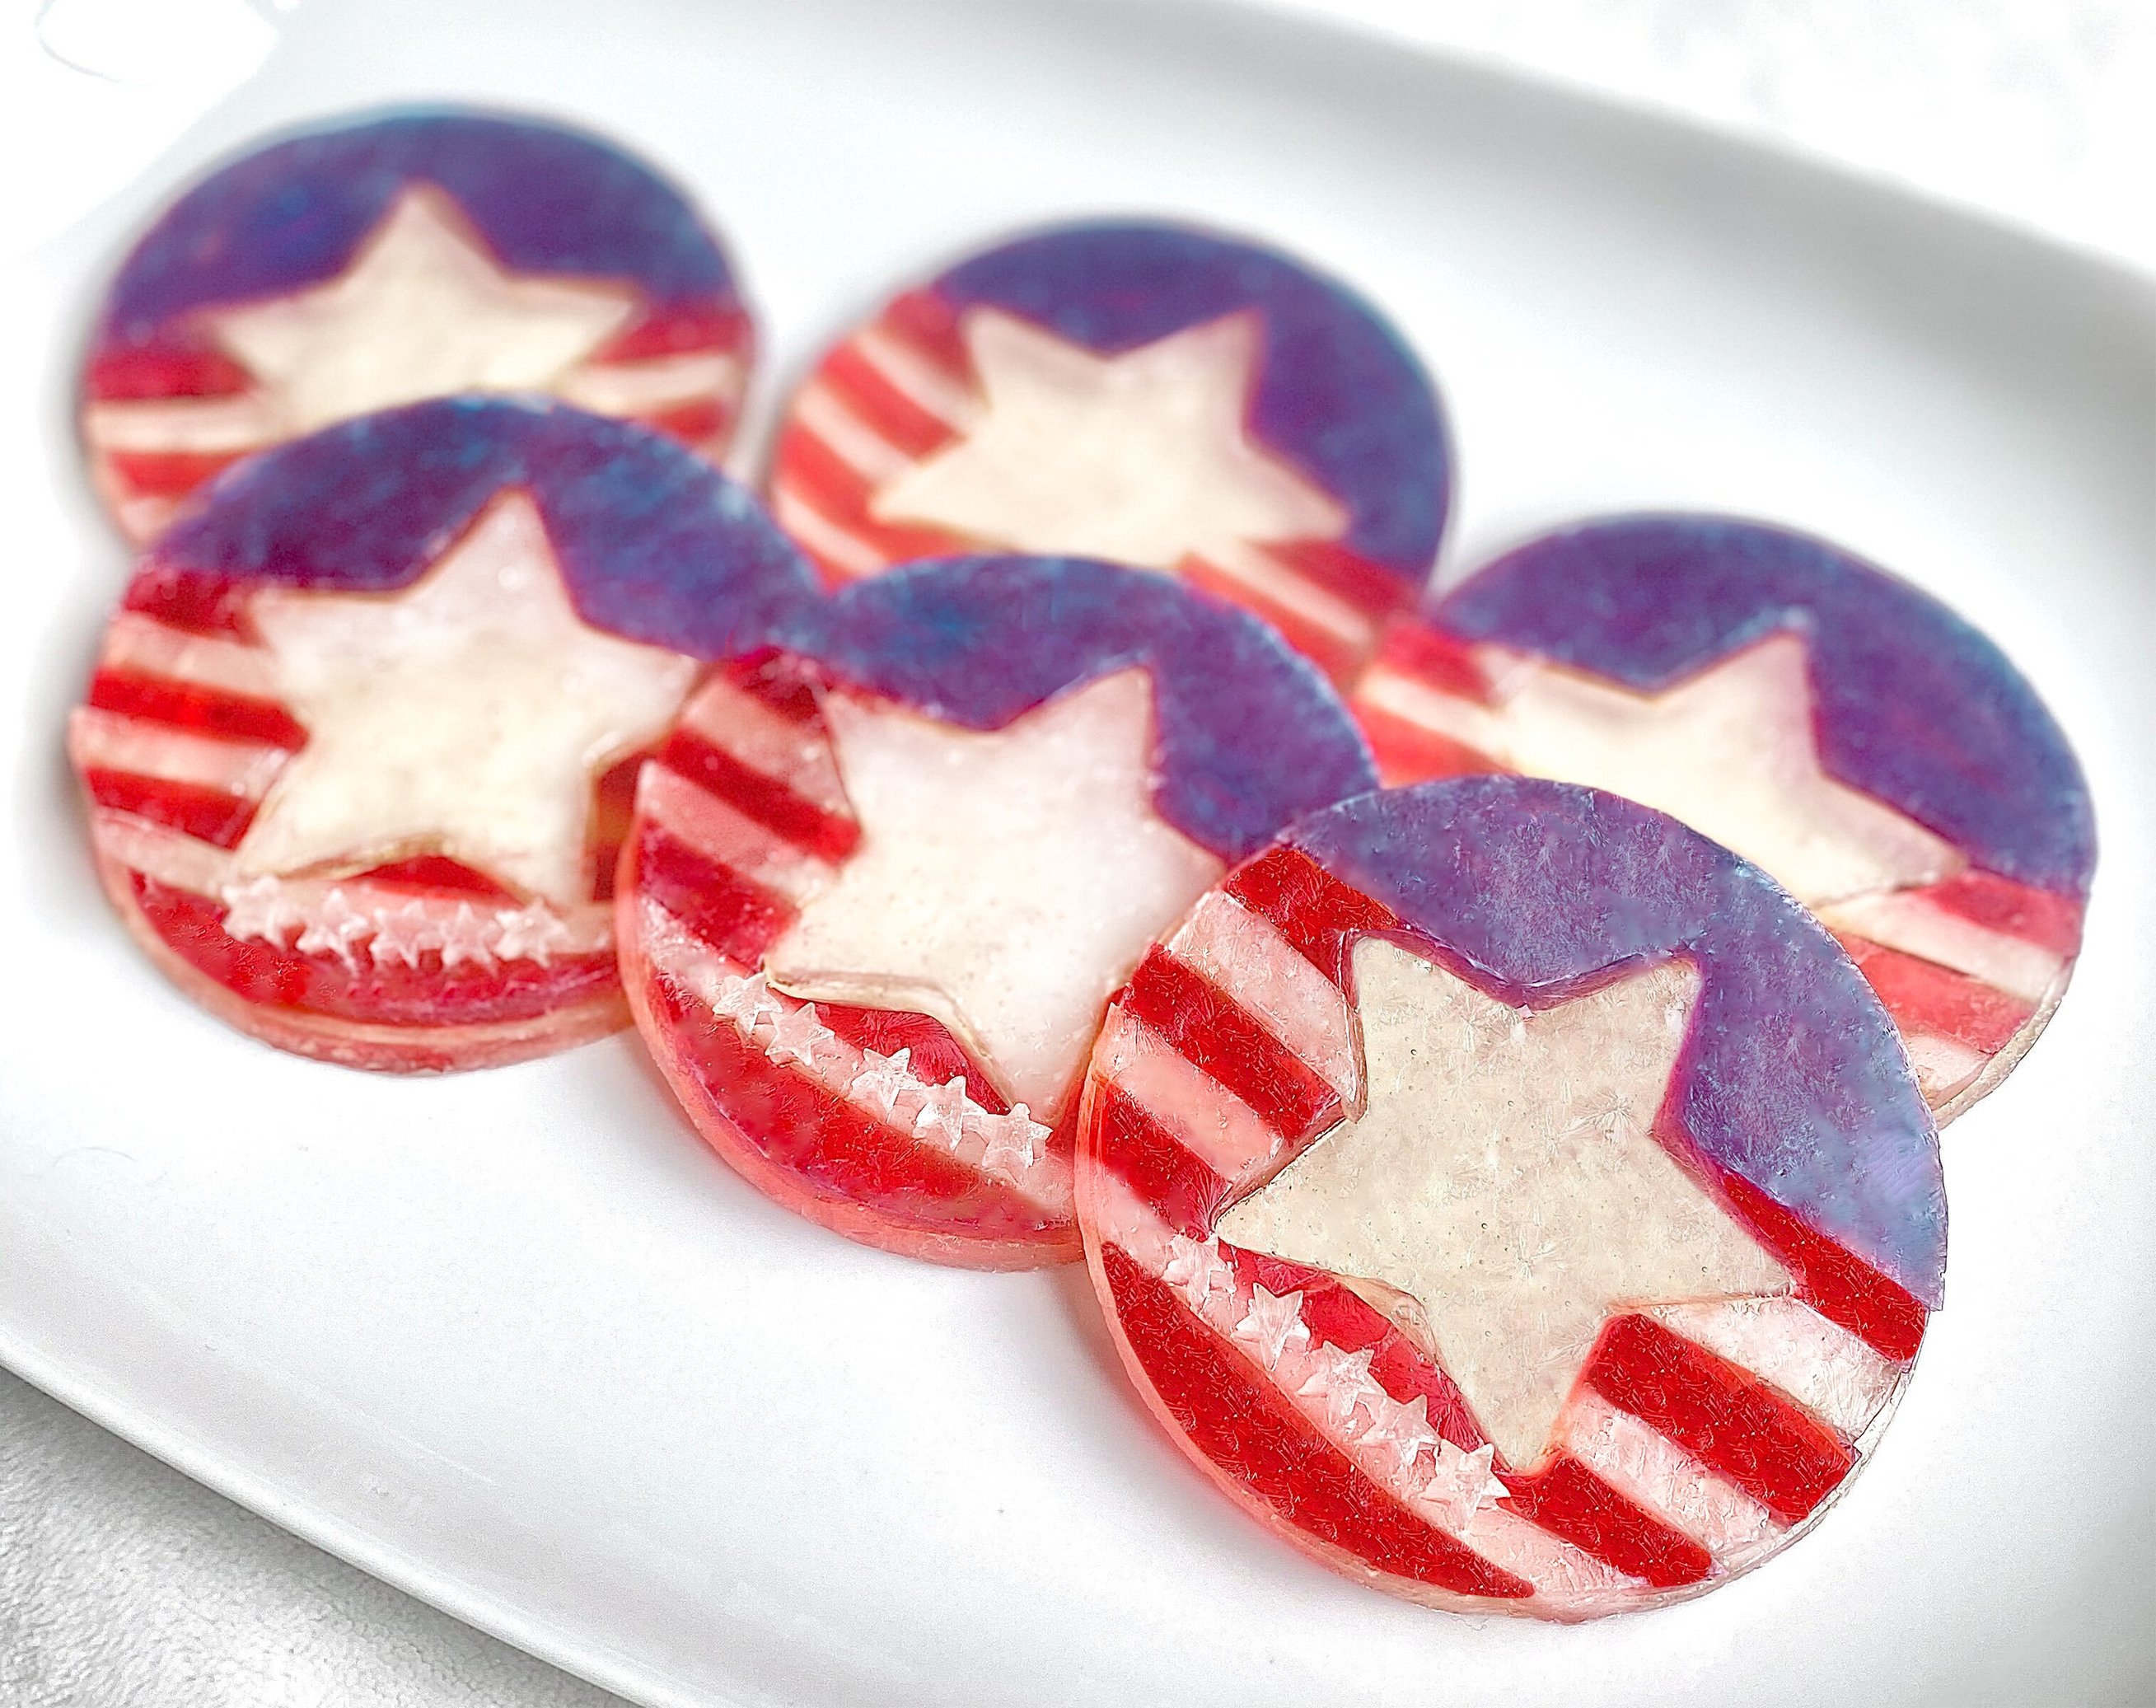 Sweets designed with an American flag motif, featuring a blue field with white stars and alternating red and white stripes, presented on a white plate or surface.